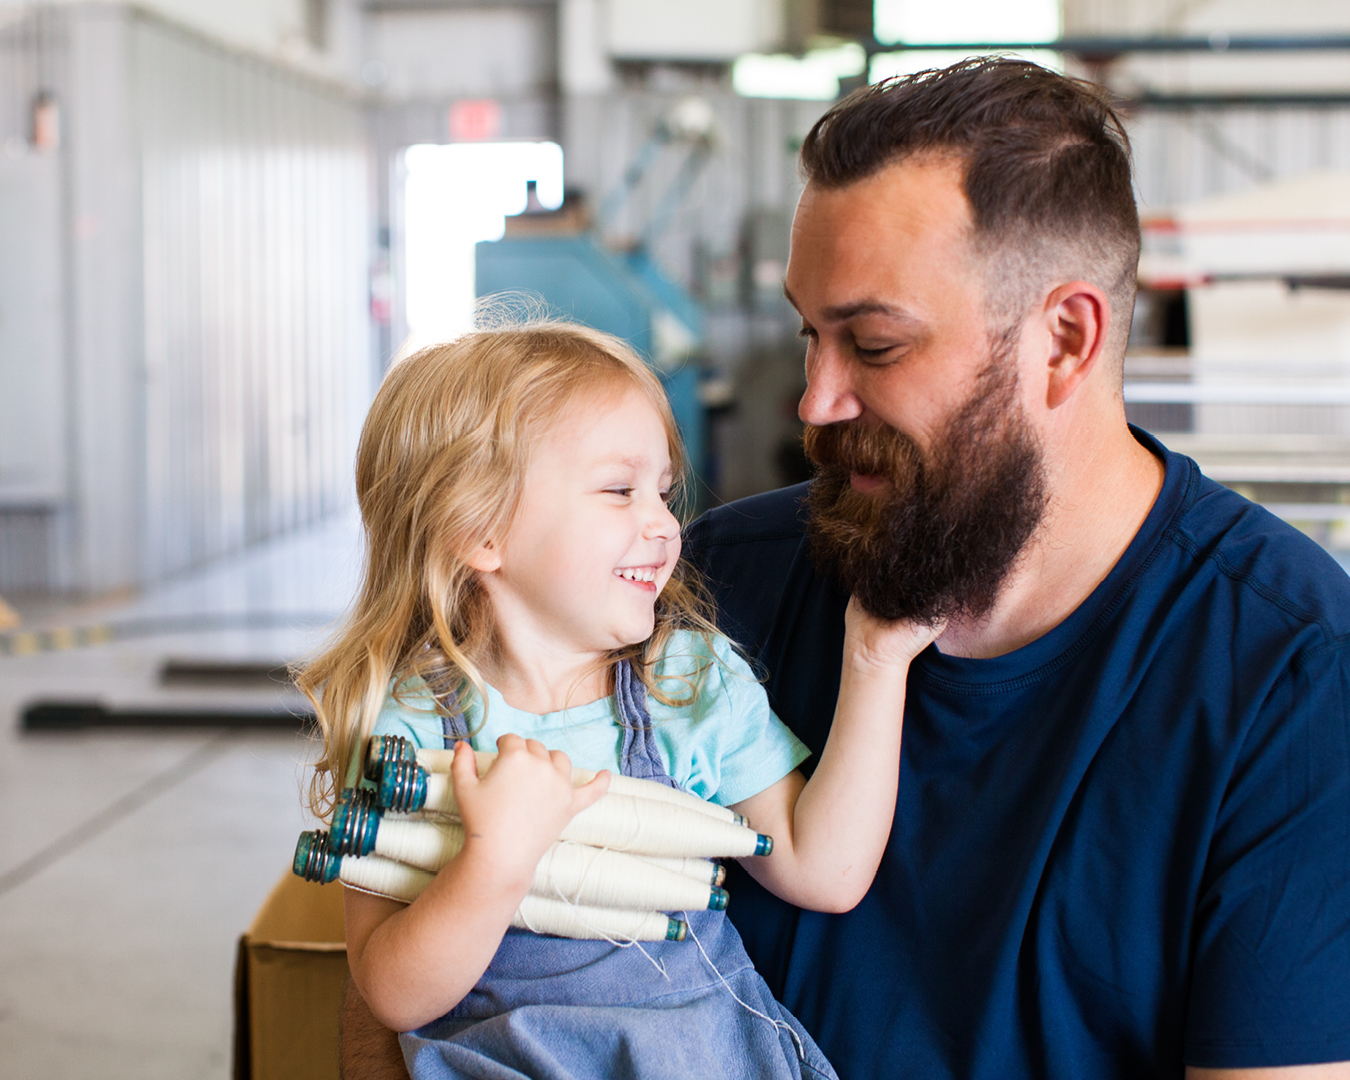 color-photography-craftsman-holding-smiling-young-blonde-daughter-who-is-holding-shuttle-bobbins-while-also-playing-with-his-beard